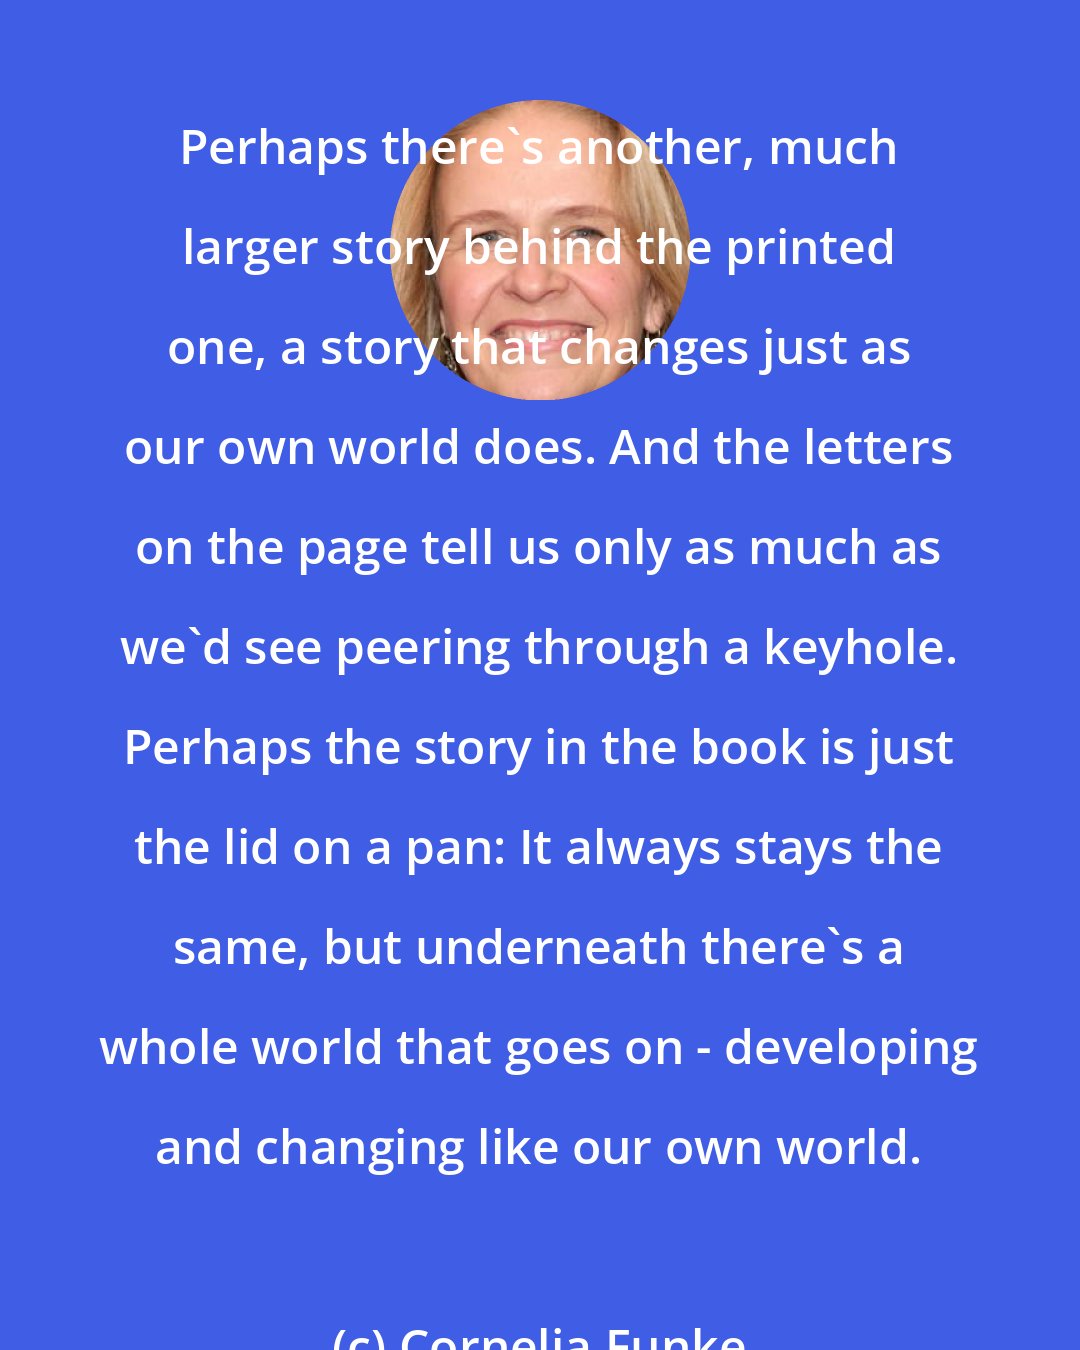 Cornelia Funke: Perhaps there's another, much larger story behind the printed one, a story that changes just as our own world does. And the letters on the page tell us only as much as we'd see peering through a keyhole. Perhaps the story in the book is just the lid on a pan: It always stays the same, but underneath there's a whole world that goes on - developing and changing like our own world.